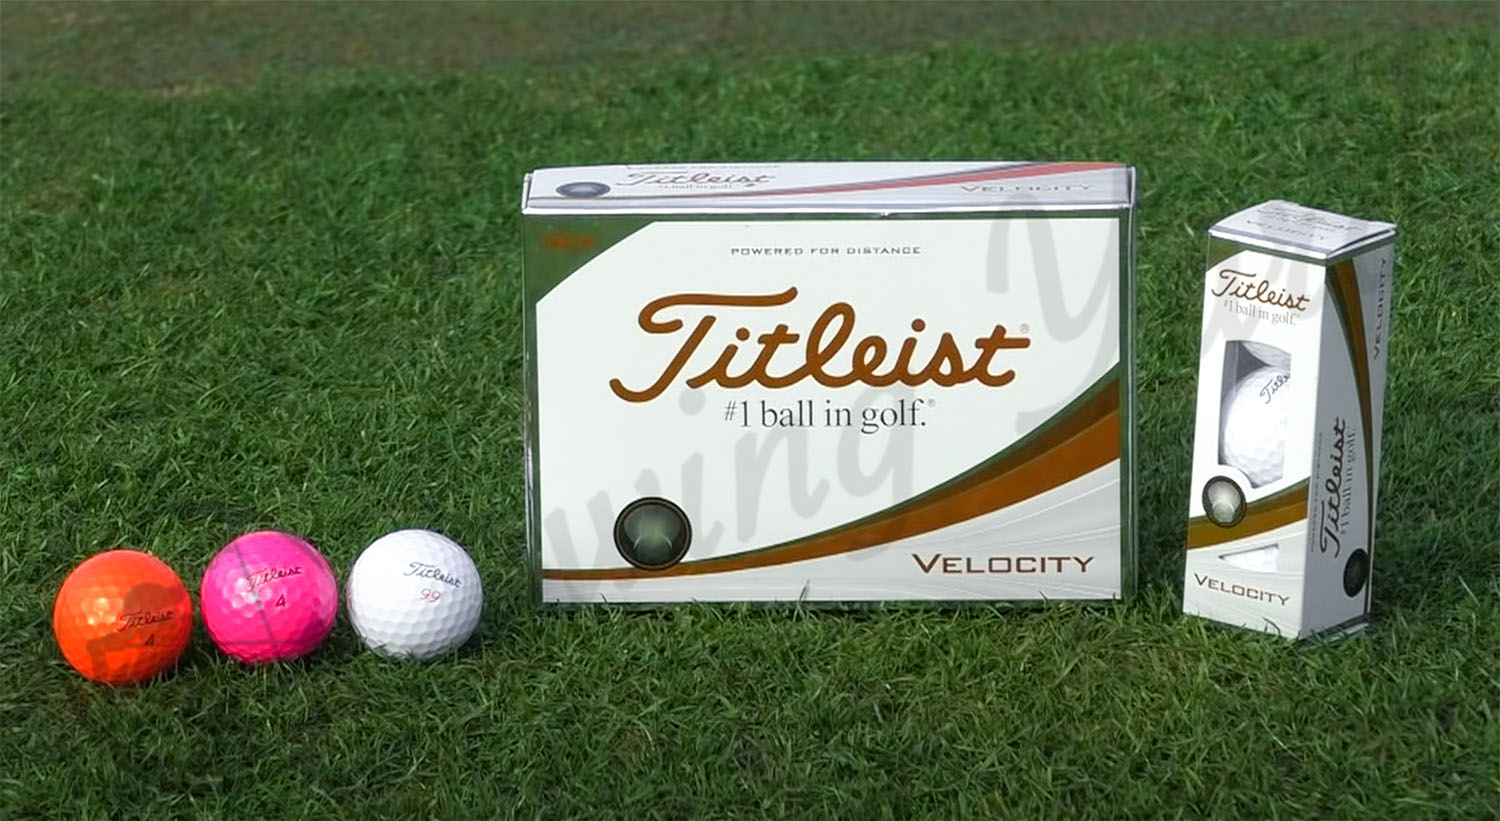 A Titleist Velocity box in the grass at the golf course